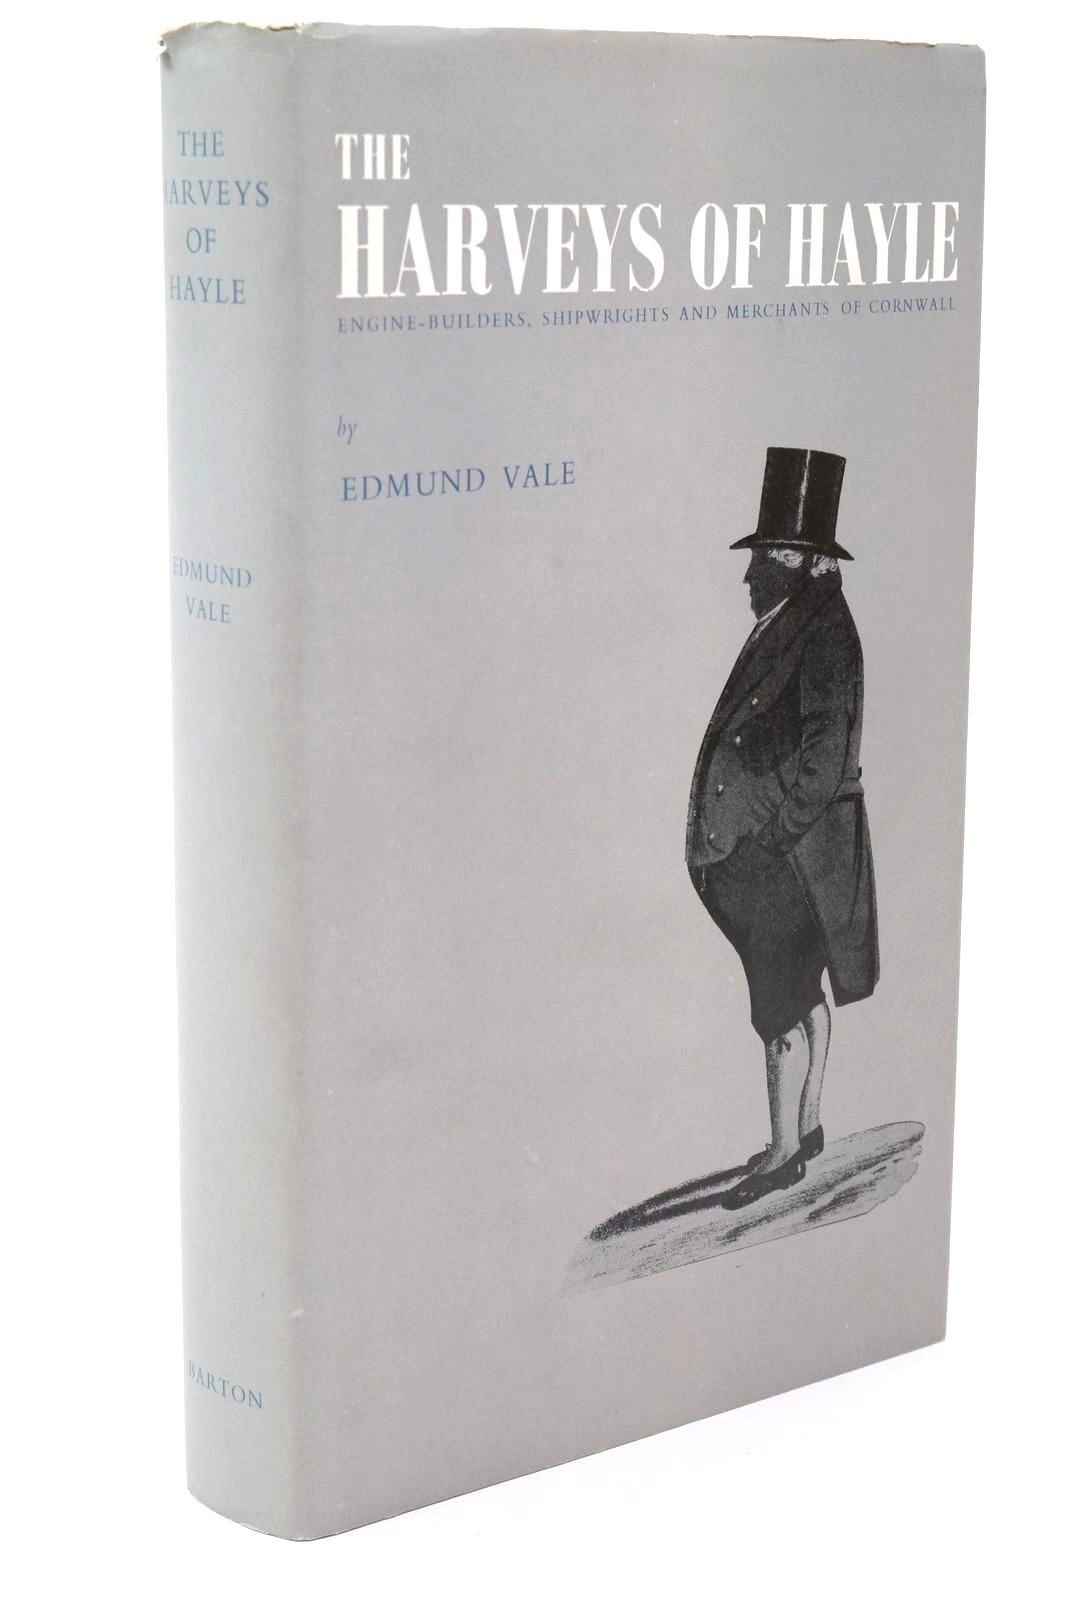 Photo of THE HARVEYS OF HALE written by Vale, Edmund published by D. Bradford Barton (STOCK CODE: 1322501)  for sale by Stella & Rose's Books